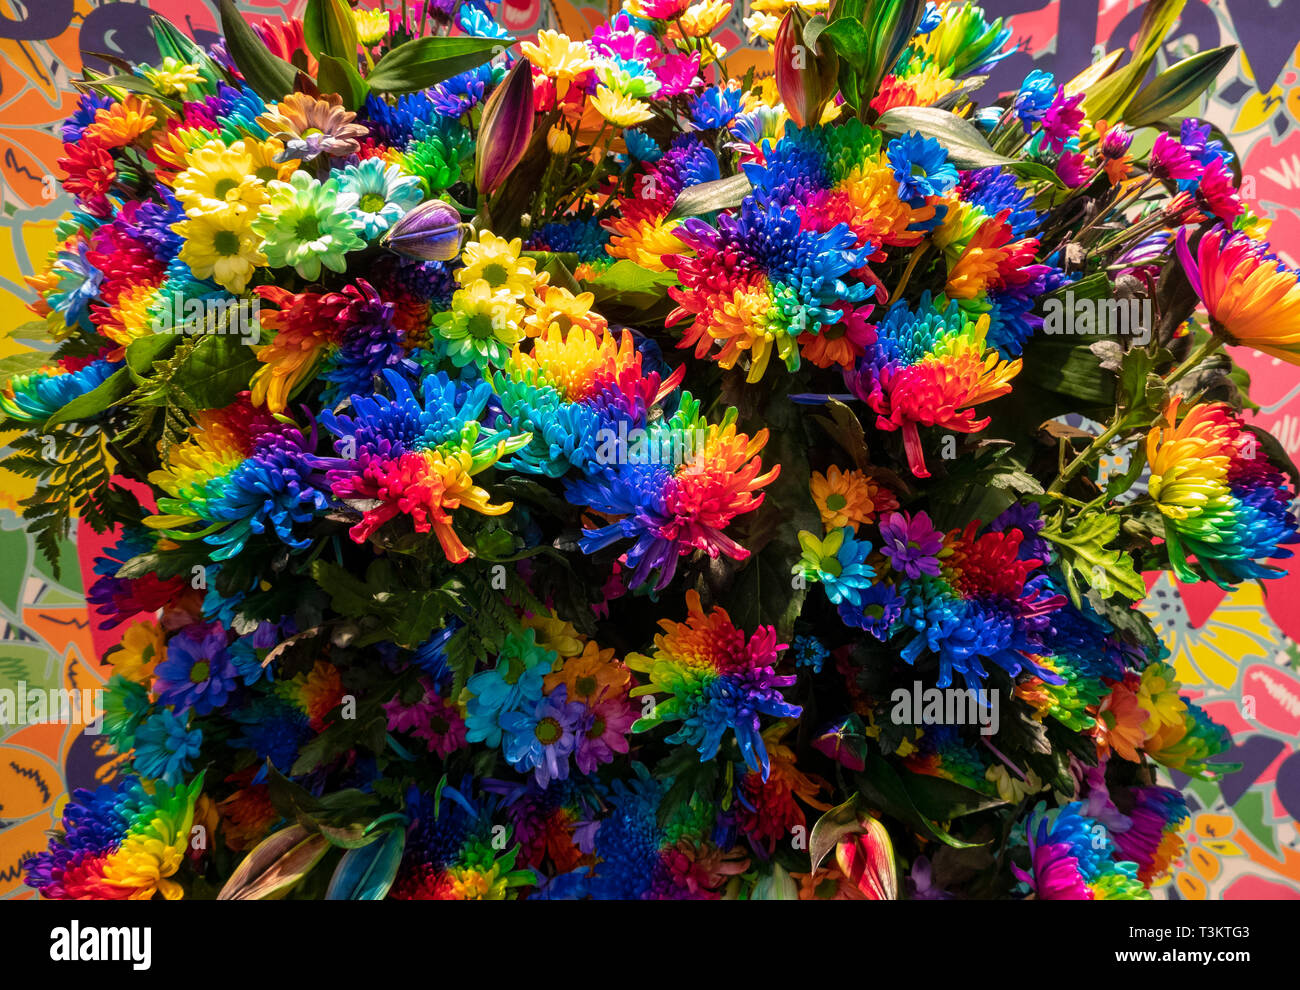 Artificially colored Rainbow Chrysanthemums; Rainbow Flowers or Happy Flowers. Stock Photo